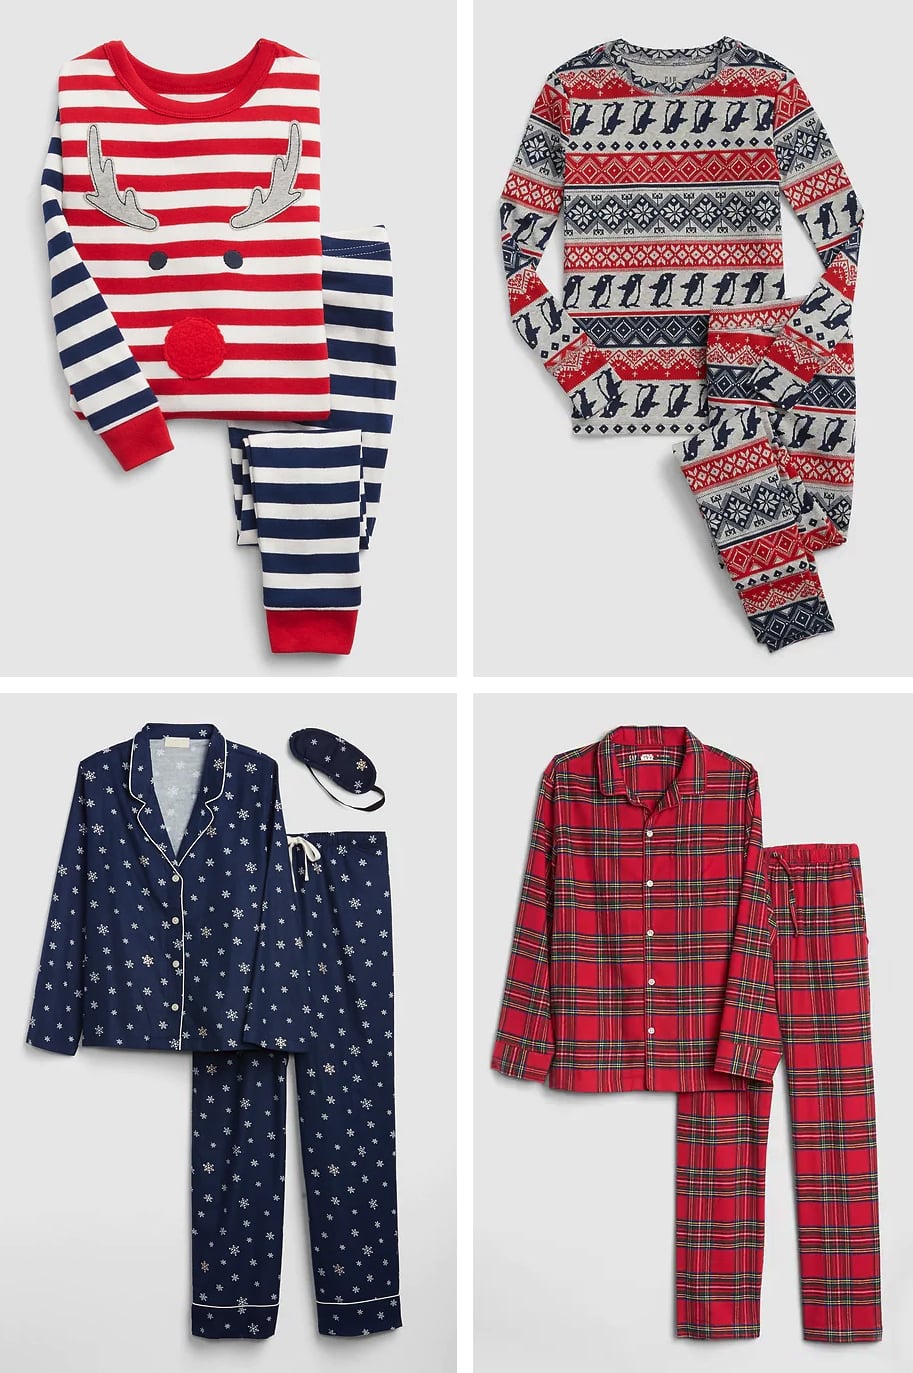 Pajama Party 3 Coordinating Outfit Ideas For The Ultimate Family Holiday Card Popsugar Family Photo 2 Pajamas are required because it is a slumber party. pajama party 3 coordinating outfit